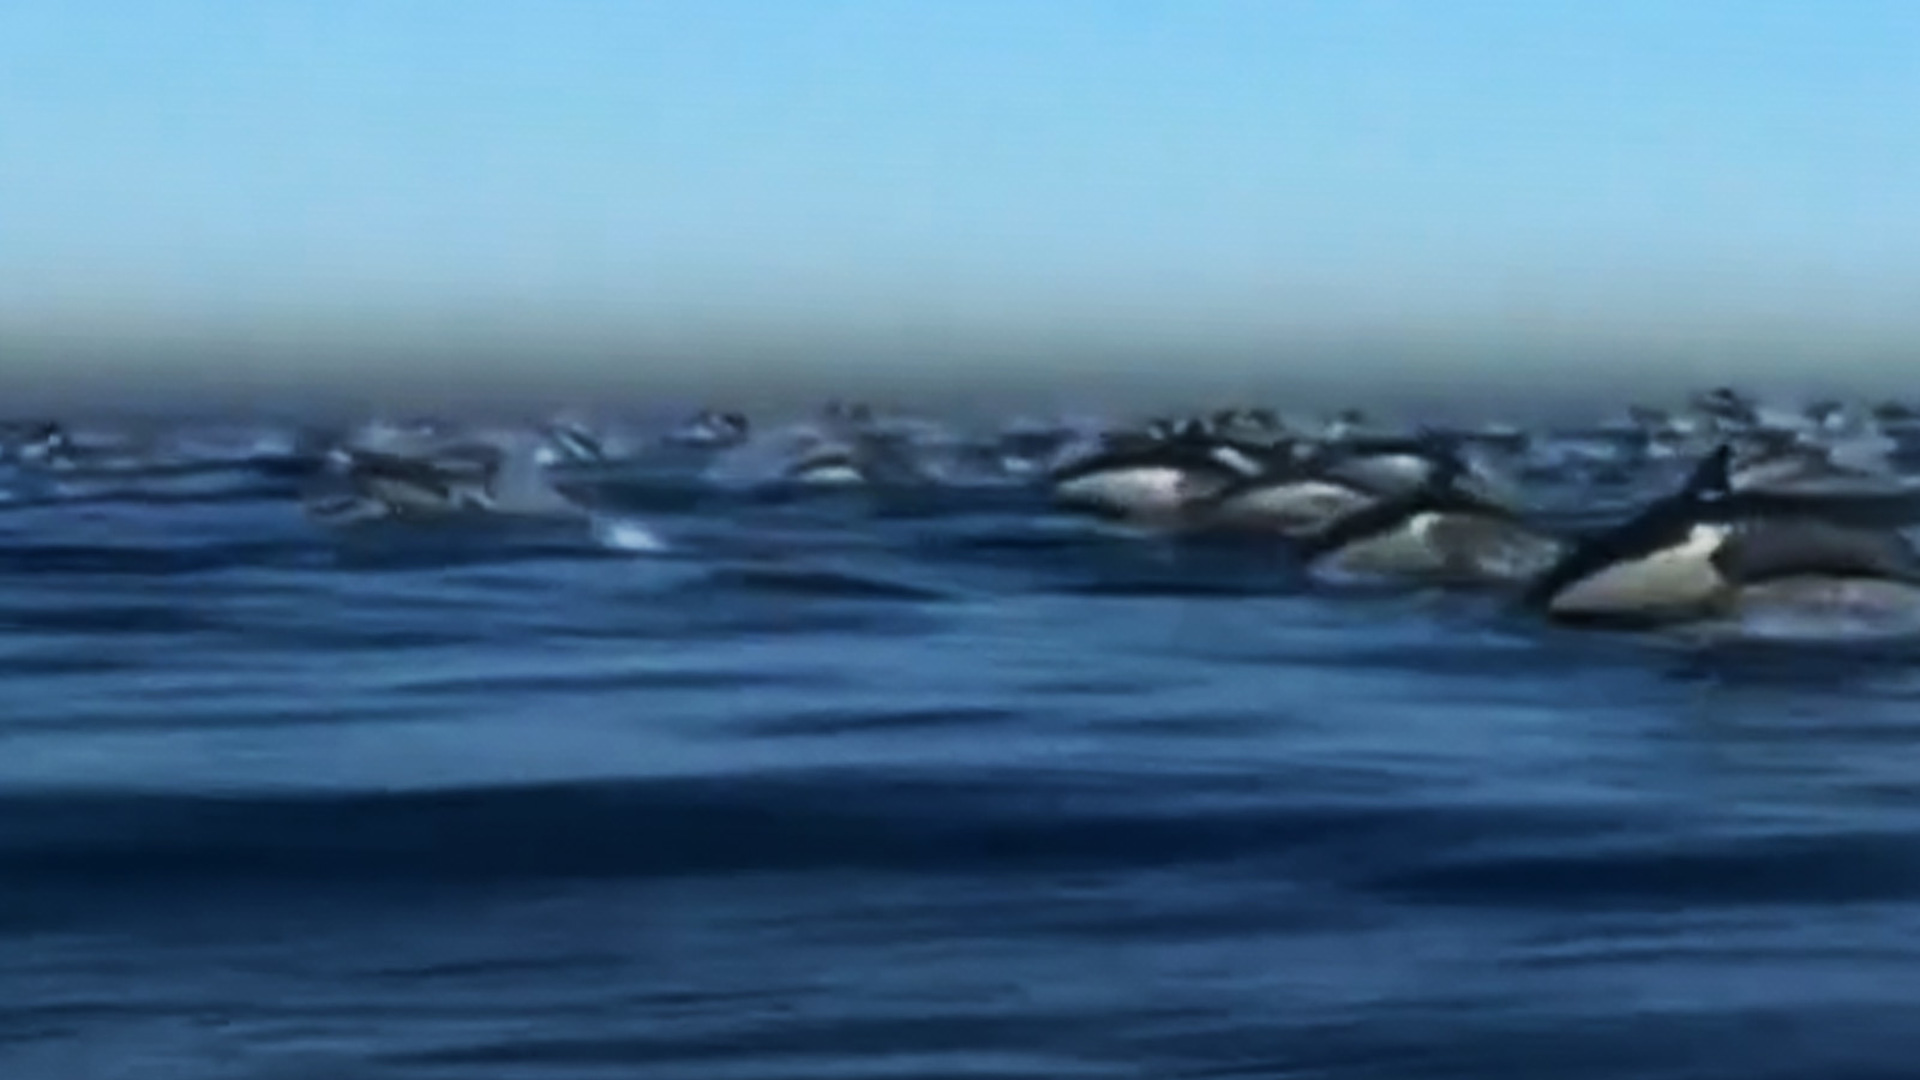 DOLPHIN STAMPEDE: Around 2,000 dolphins were seen "stampeding" off the coast of Newport Beach, California on Monday (2/22).